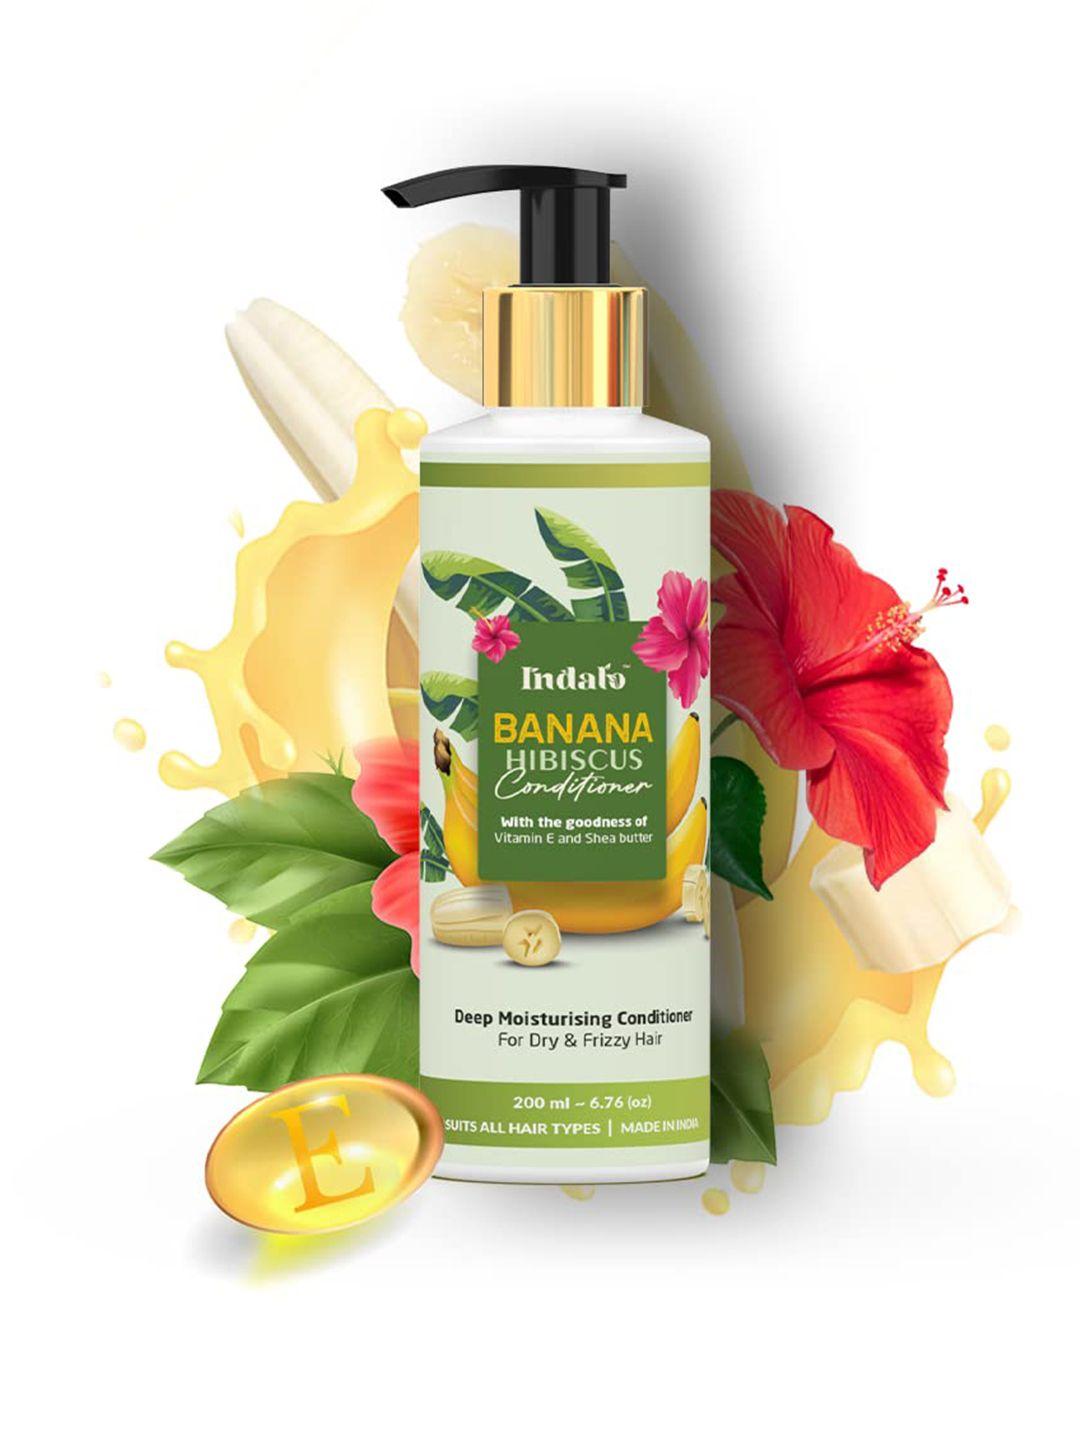 indalo banana hibiscus conditioner with shea butter & vitamin e for dry hair - 200ml